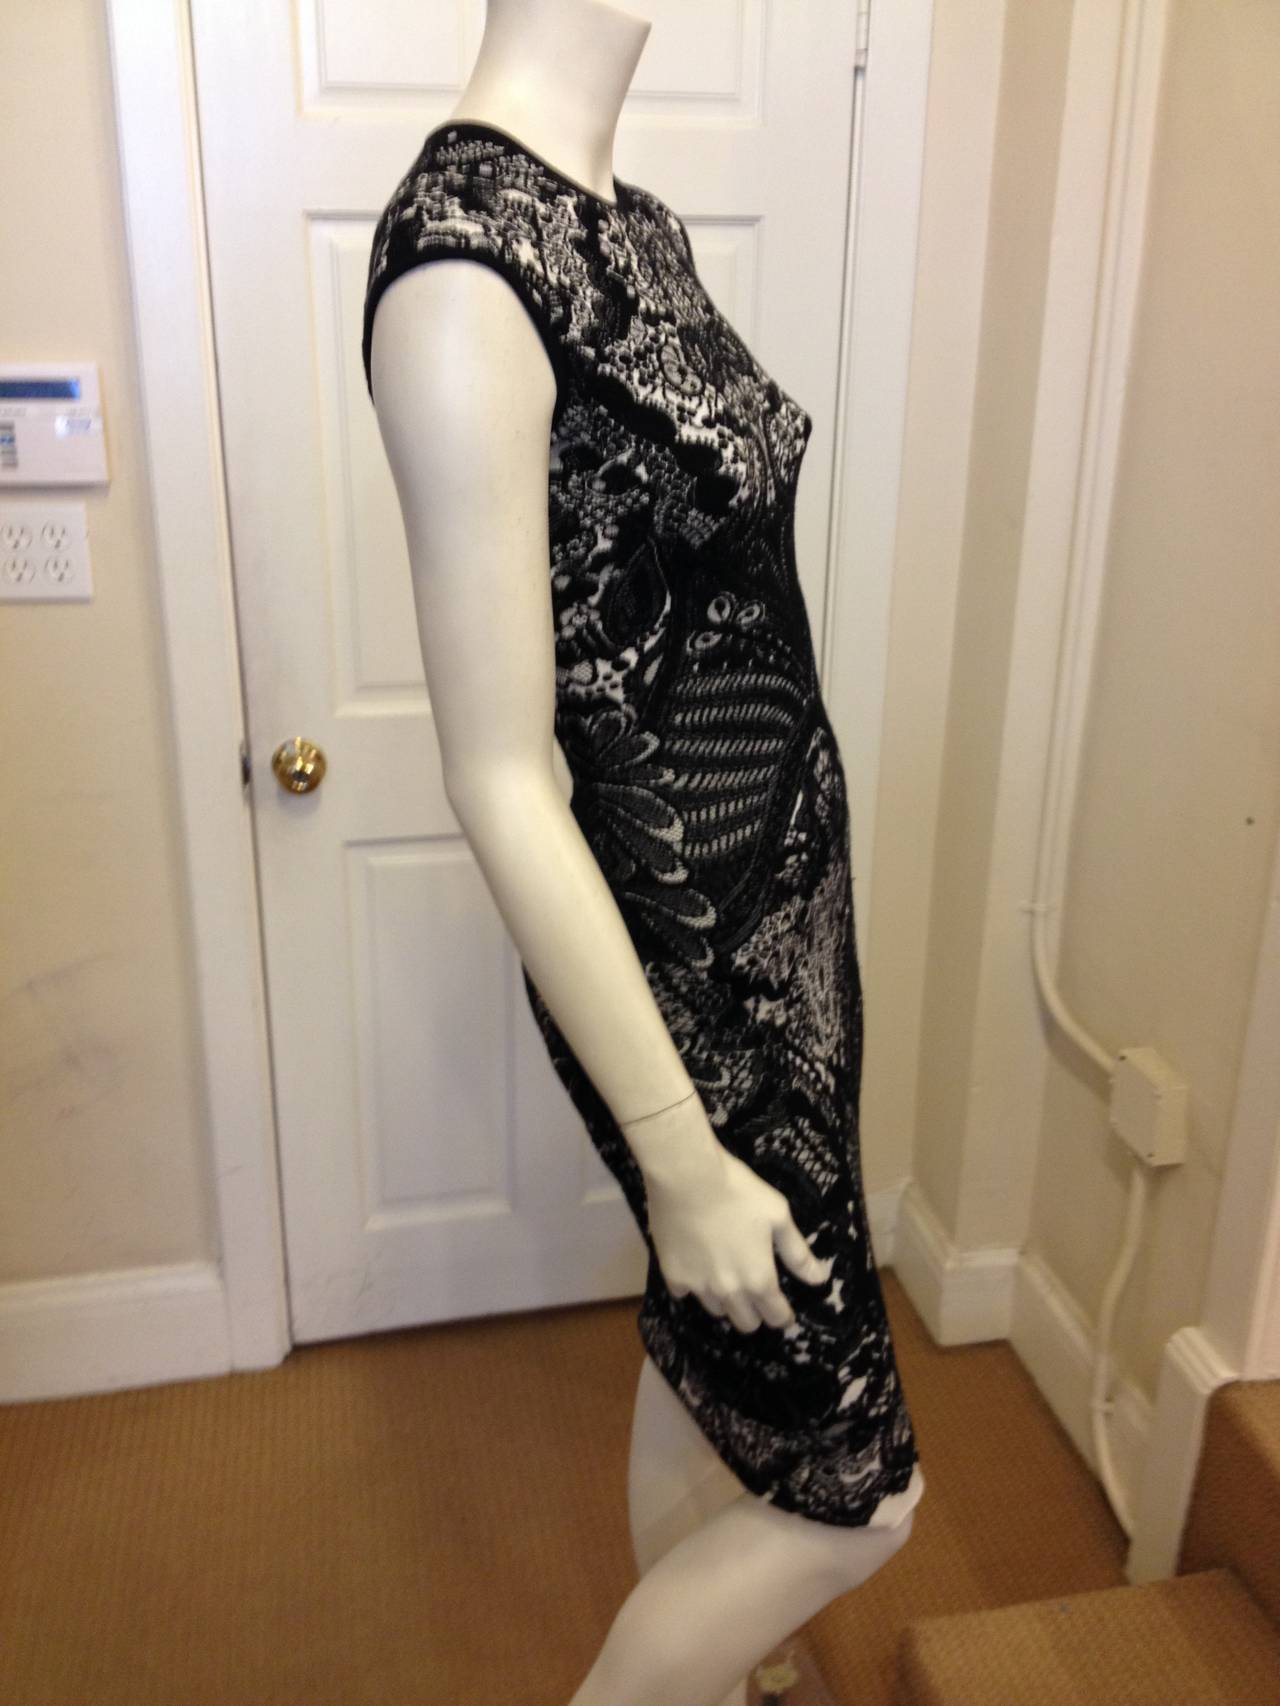 Alexander McQueen Black and White Knit Dress at 1stdibs